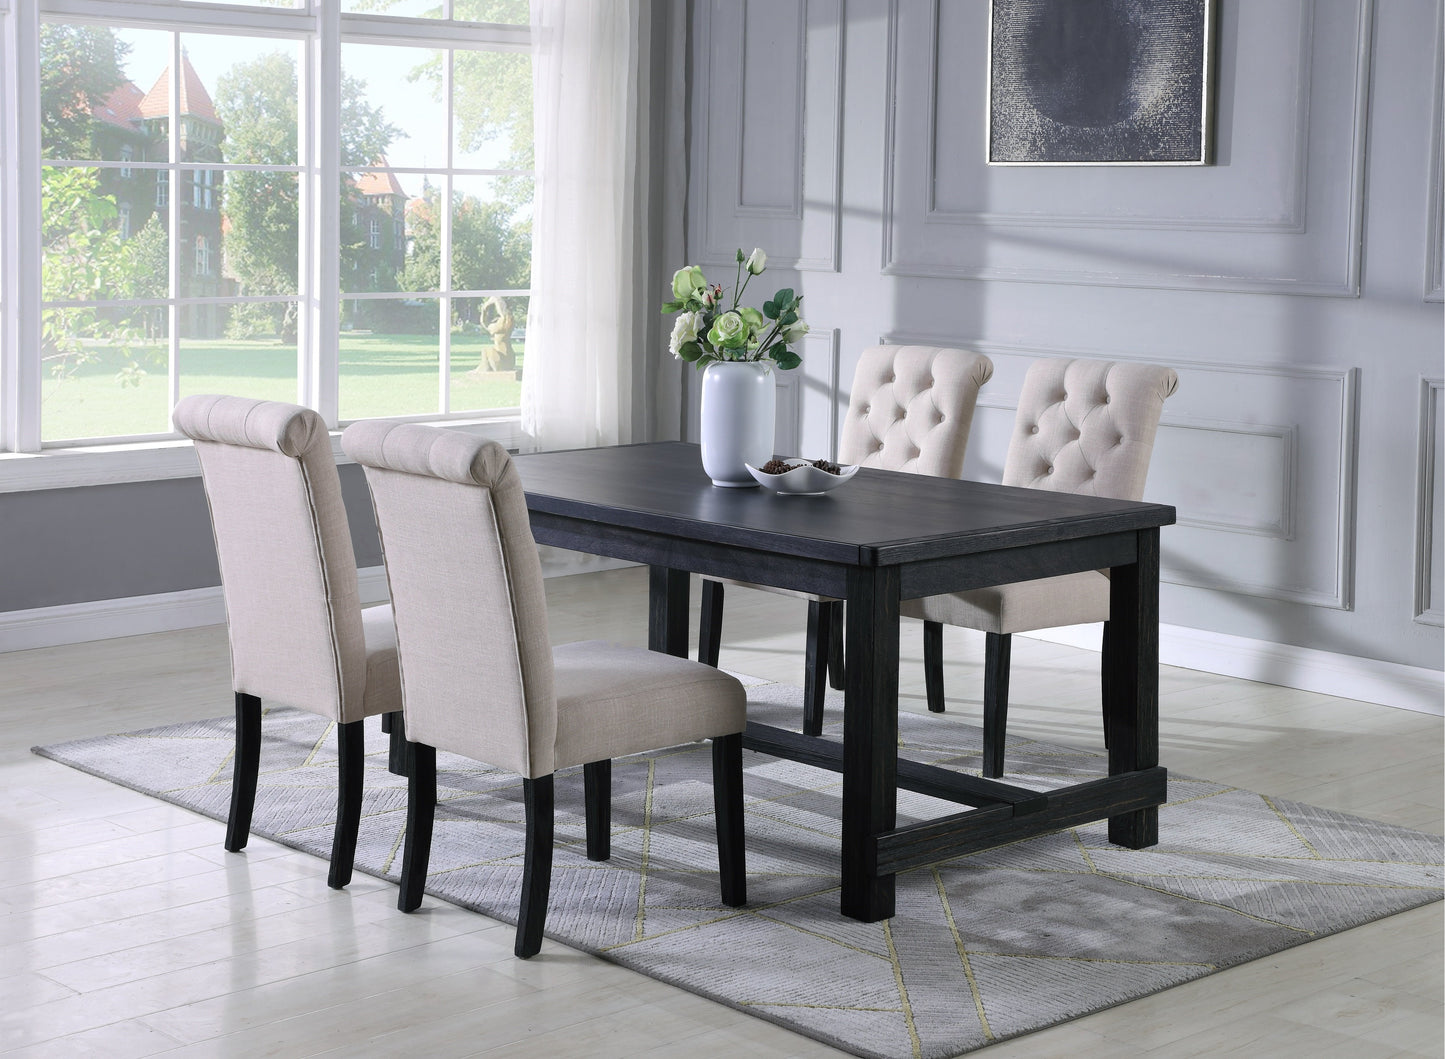 Leviton Antique Black Finished Wood Dining Set, Table with Four Chair, Tan